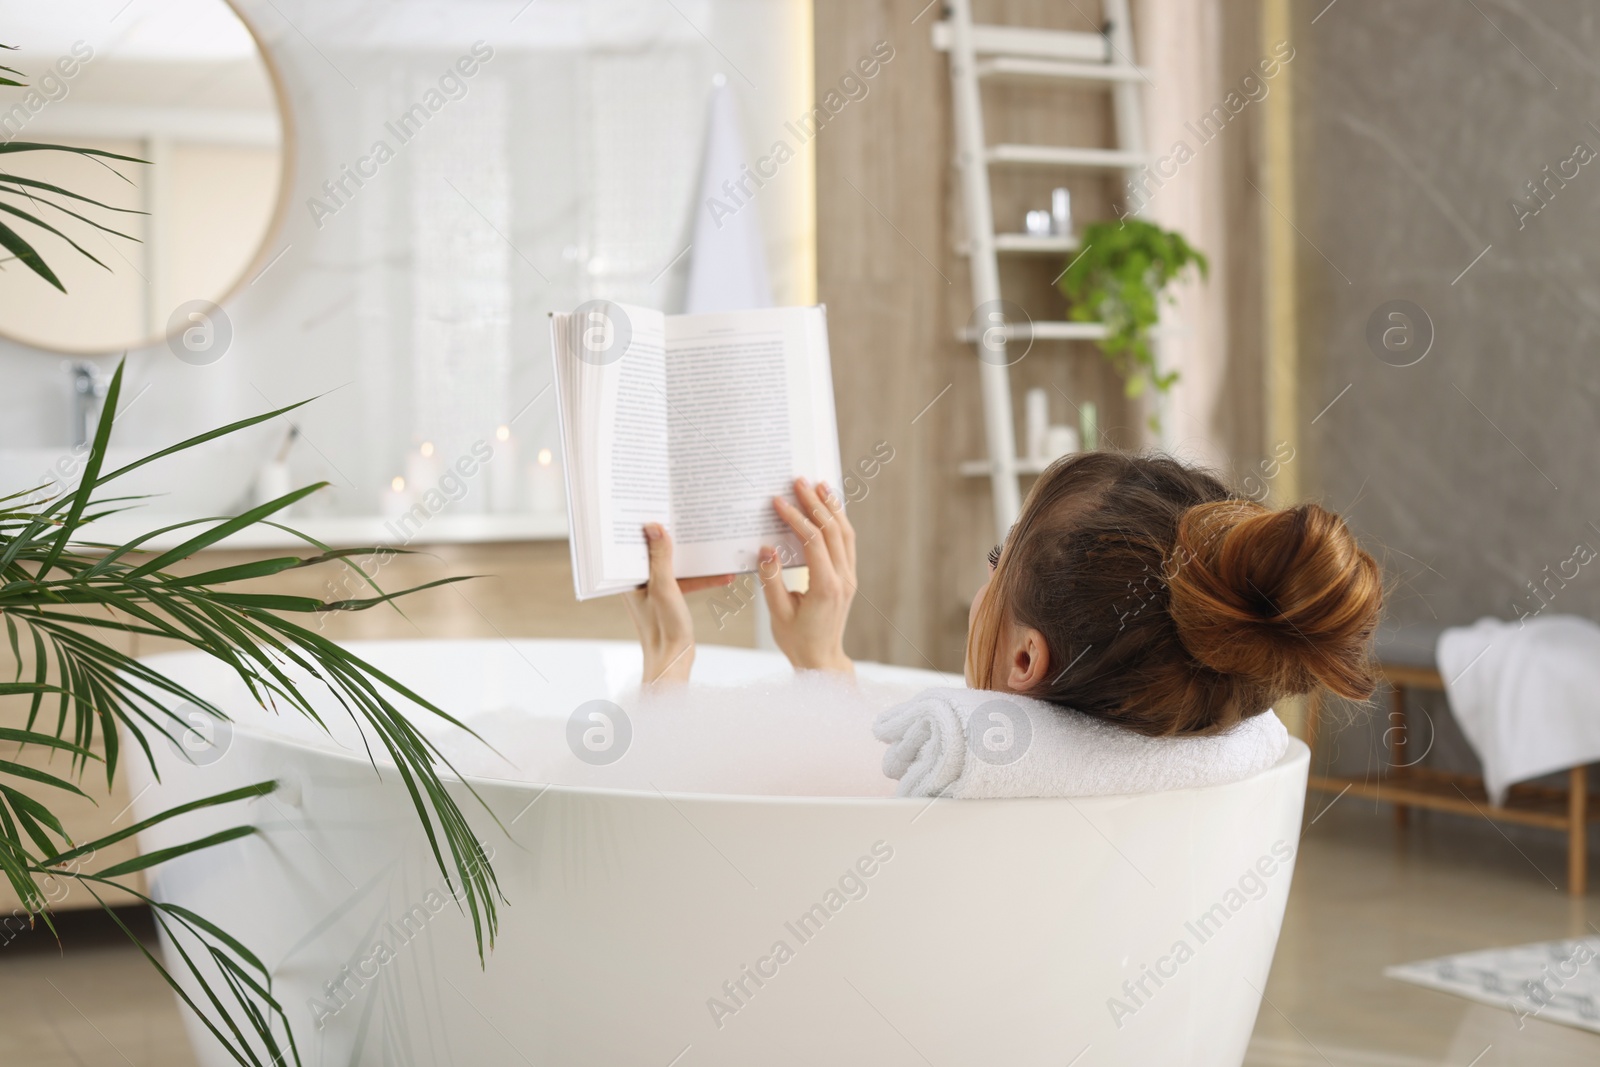 Photo of Woman reading book while enjoying bubble bath at home